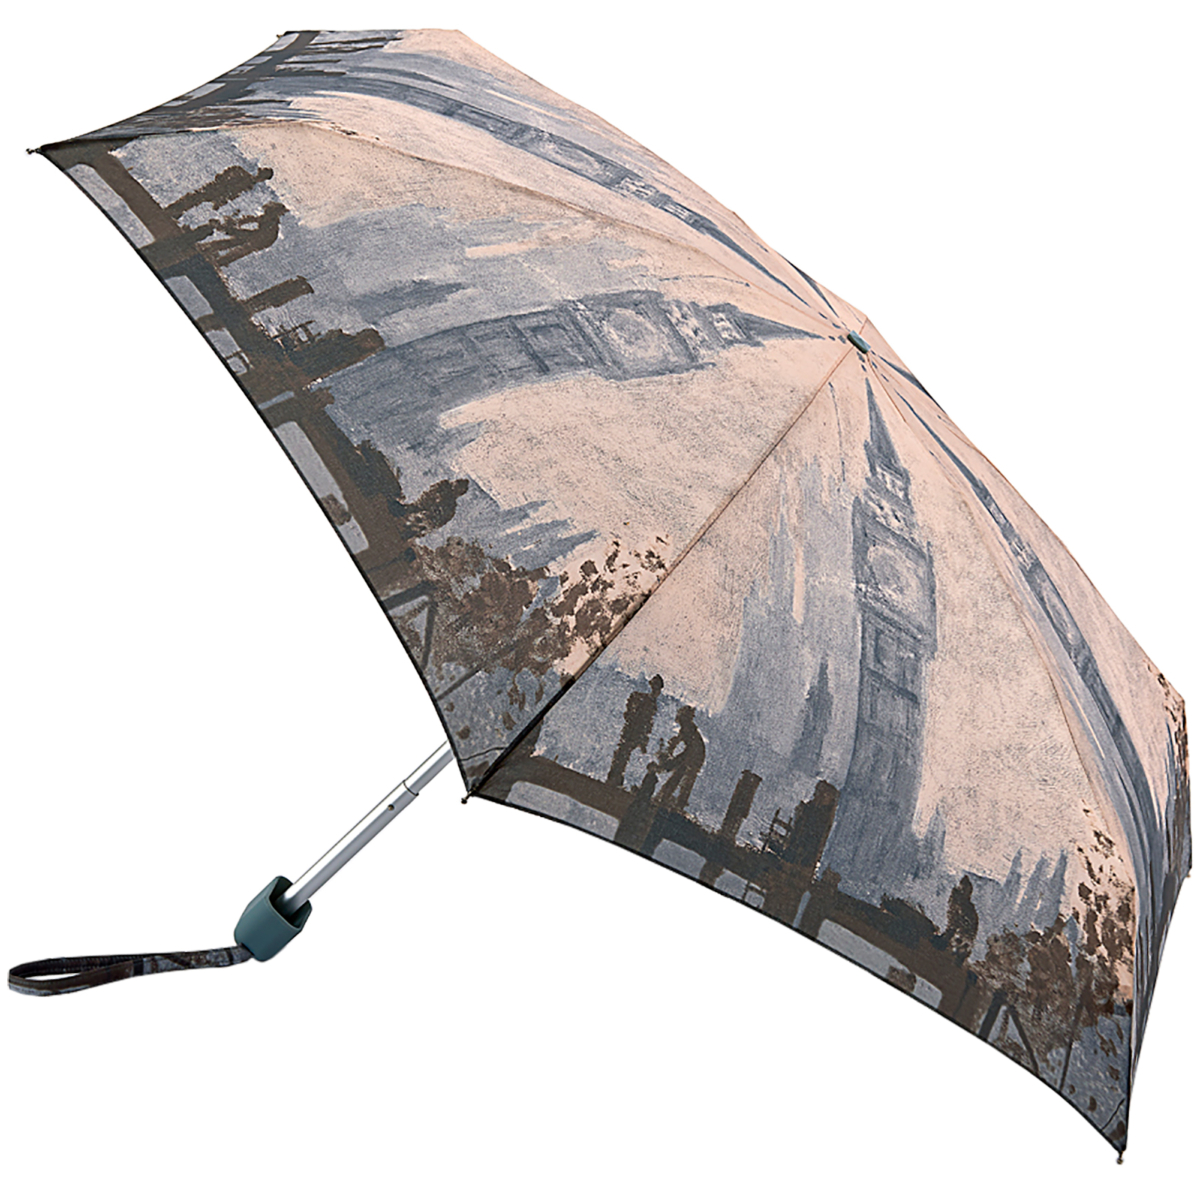 The National Gallery Tiny Umbrella - Thames Below Westminster by Monet